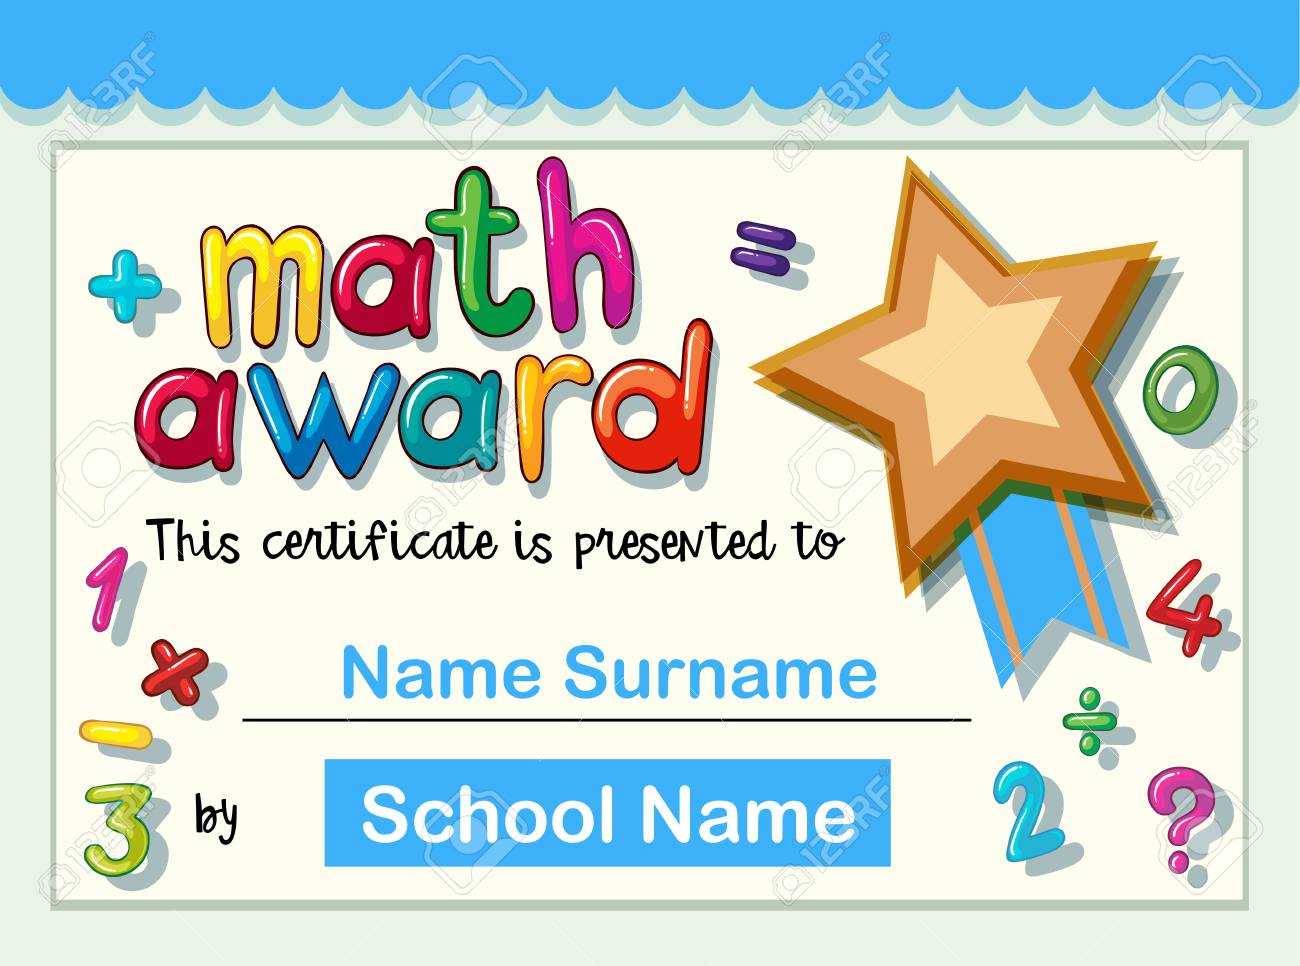 Certificate Template For Math Award With Golden Star Illustration In Math Certificate Template